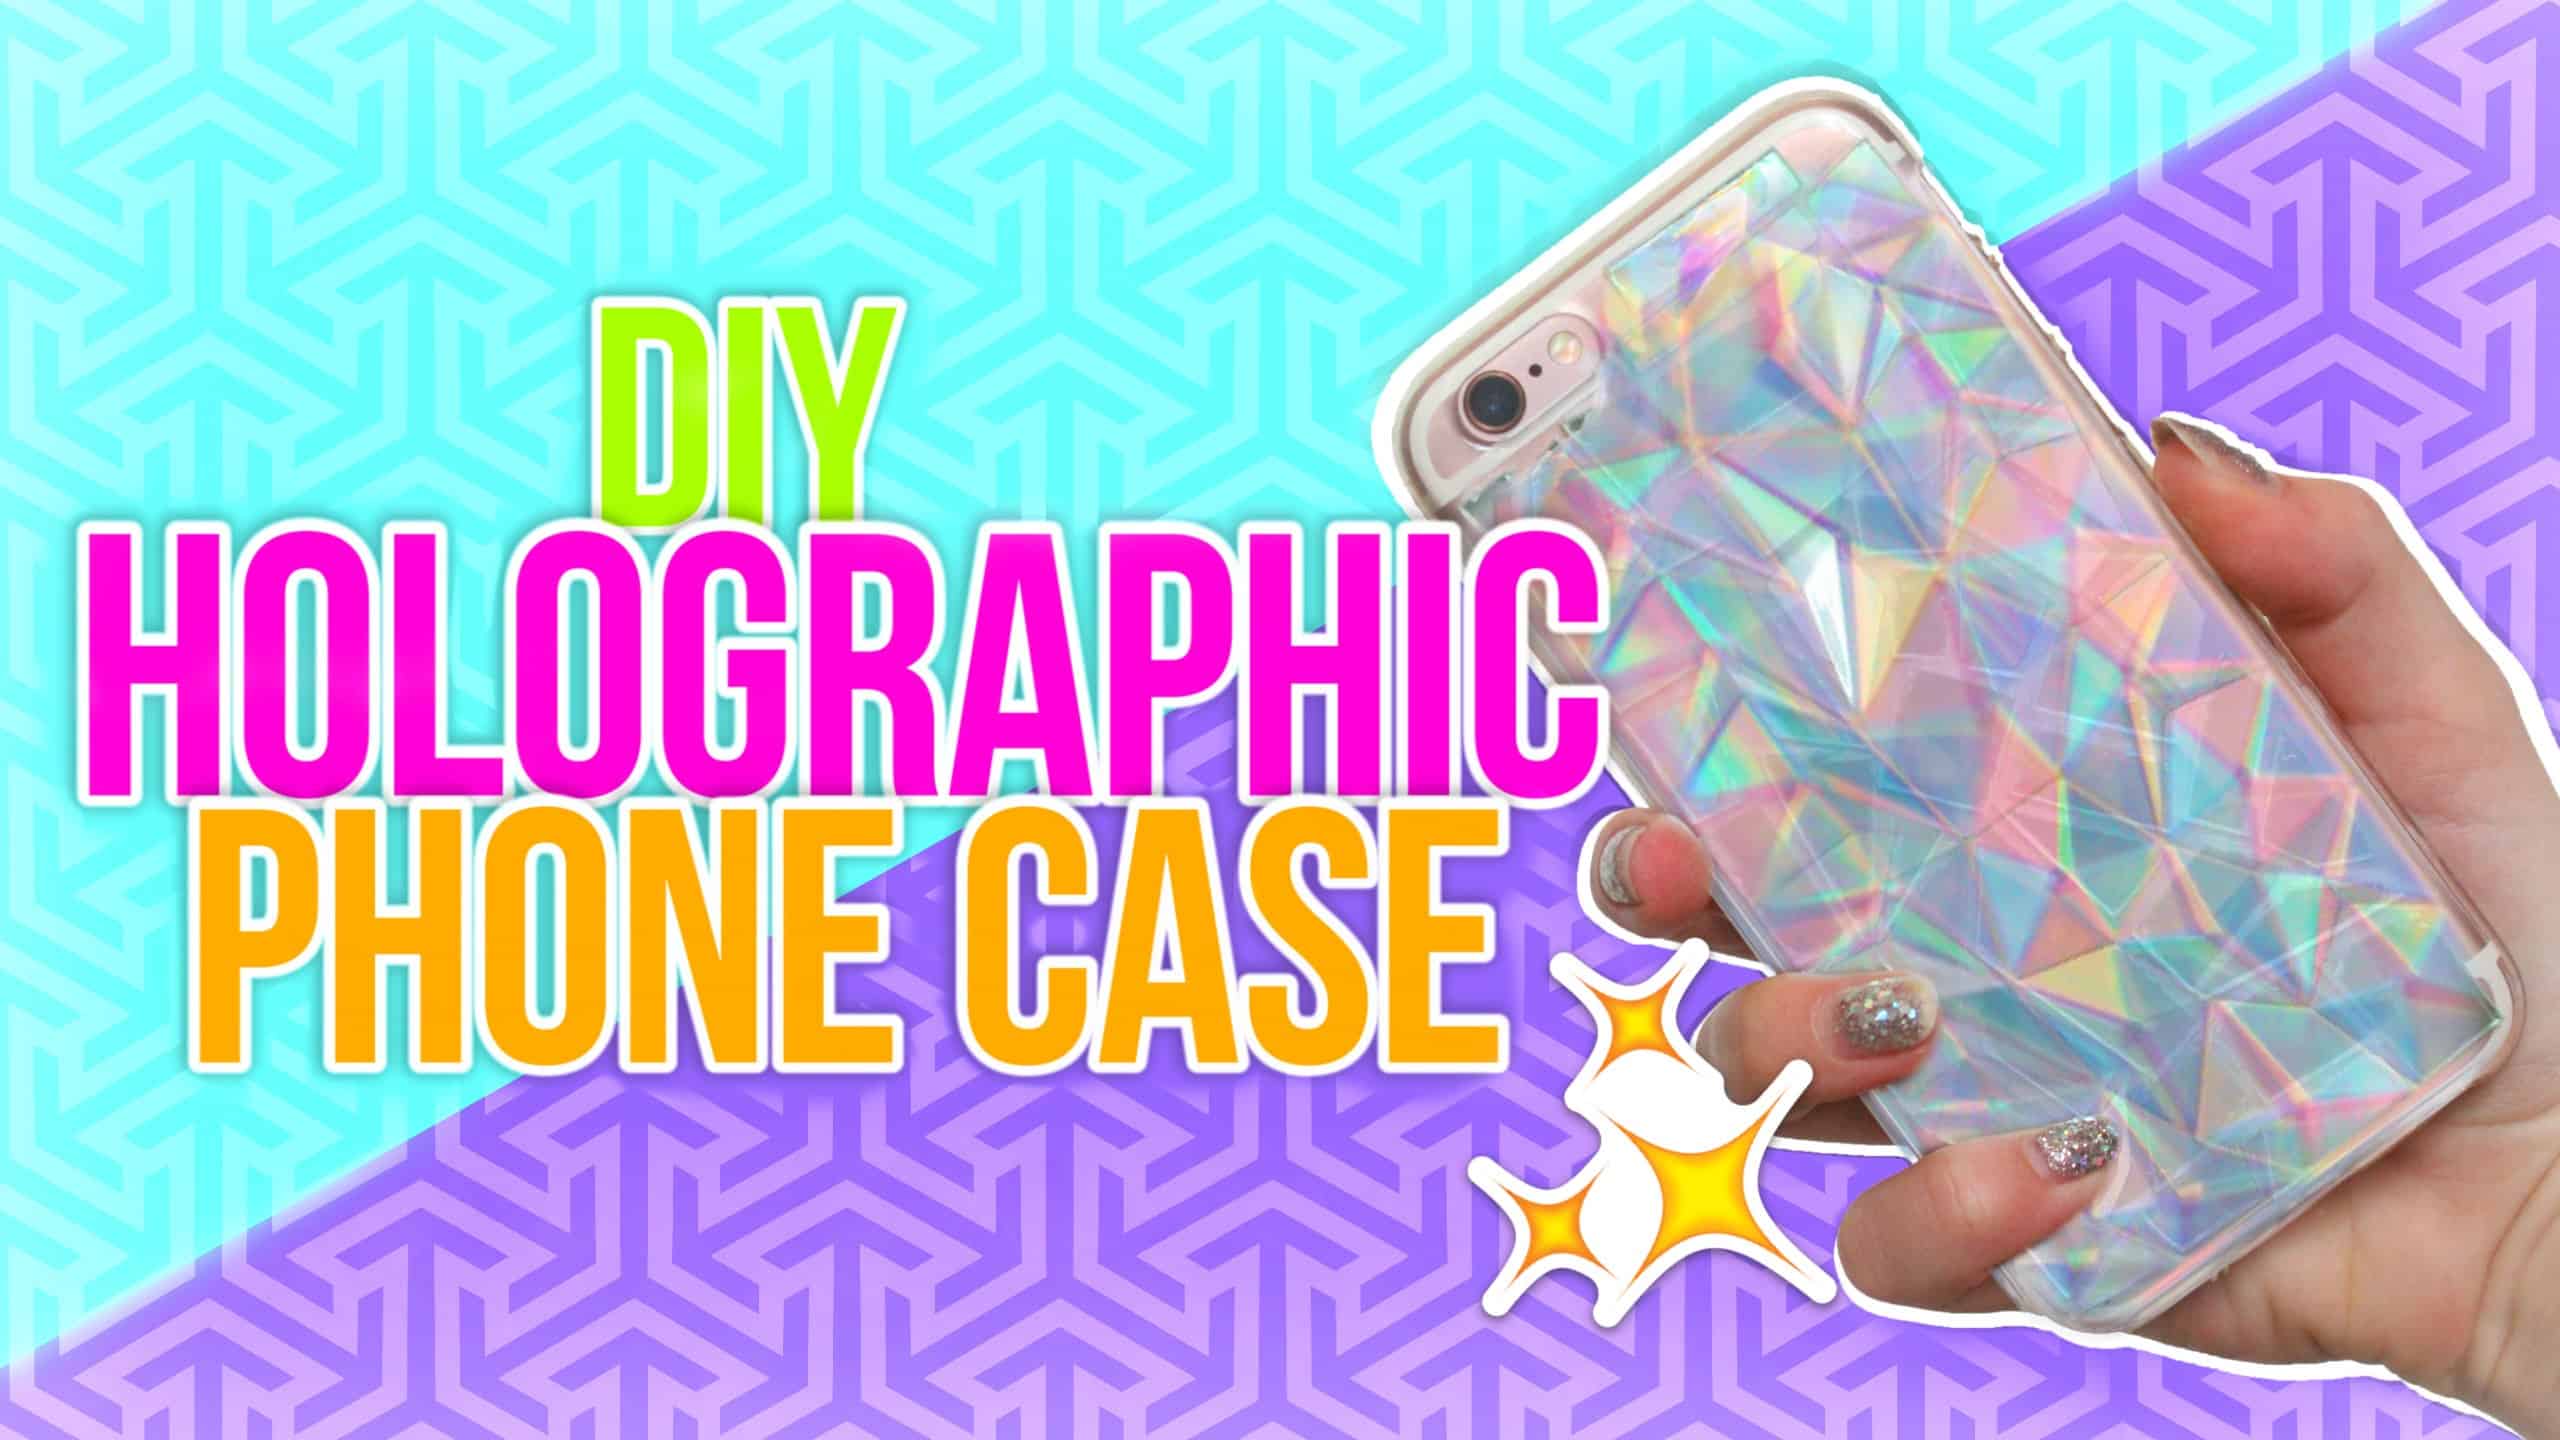 Holographic phone case